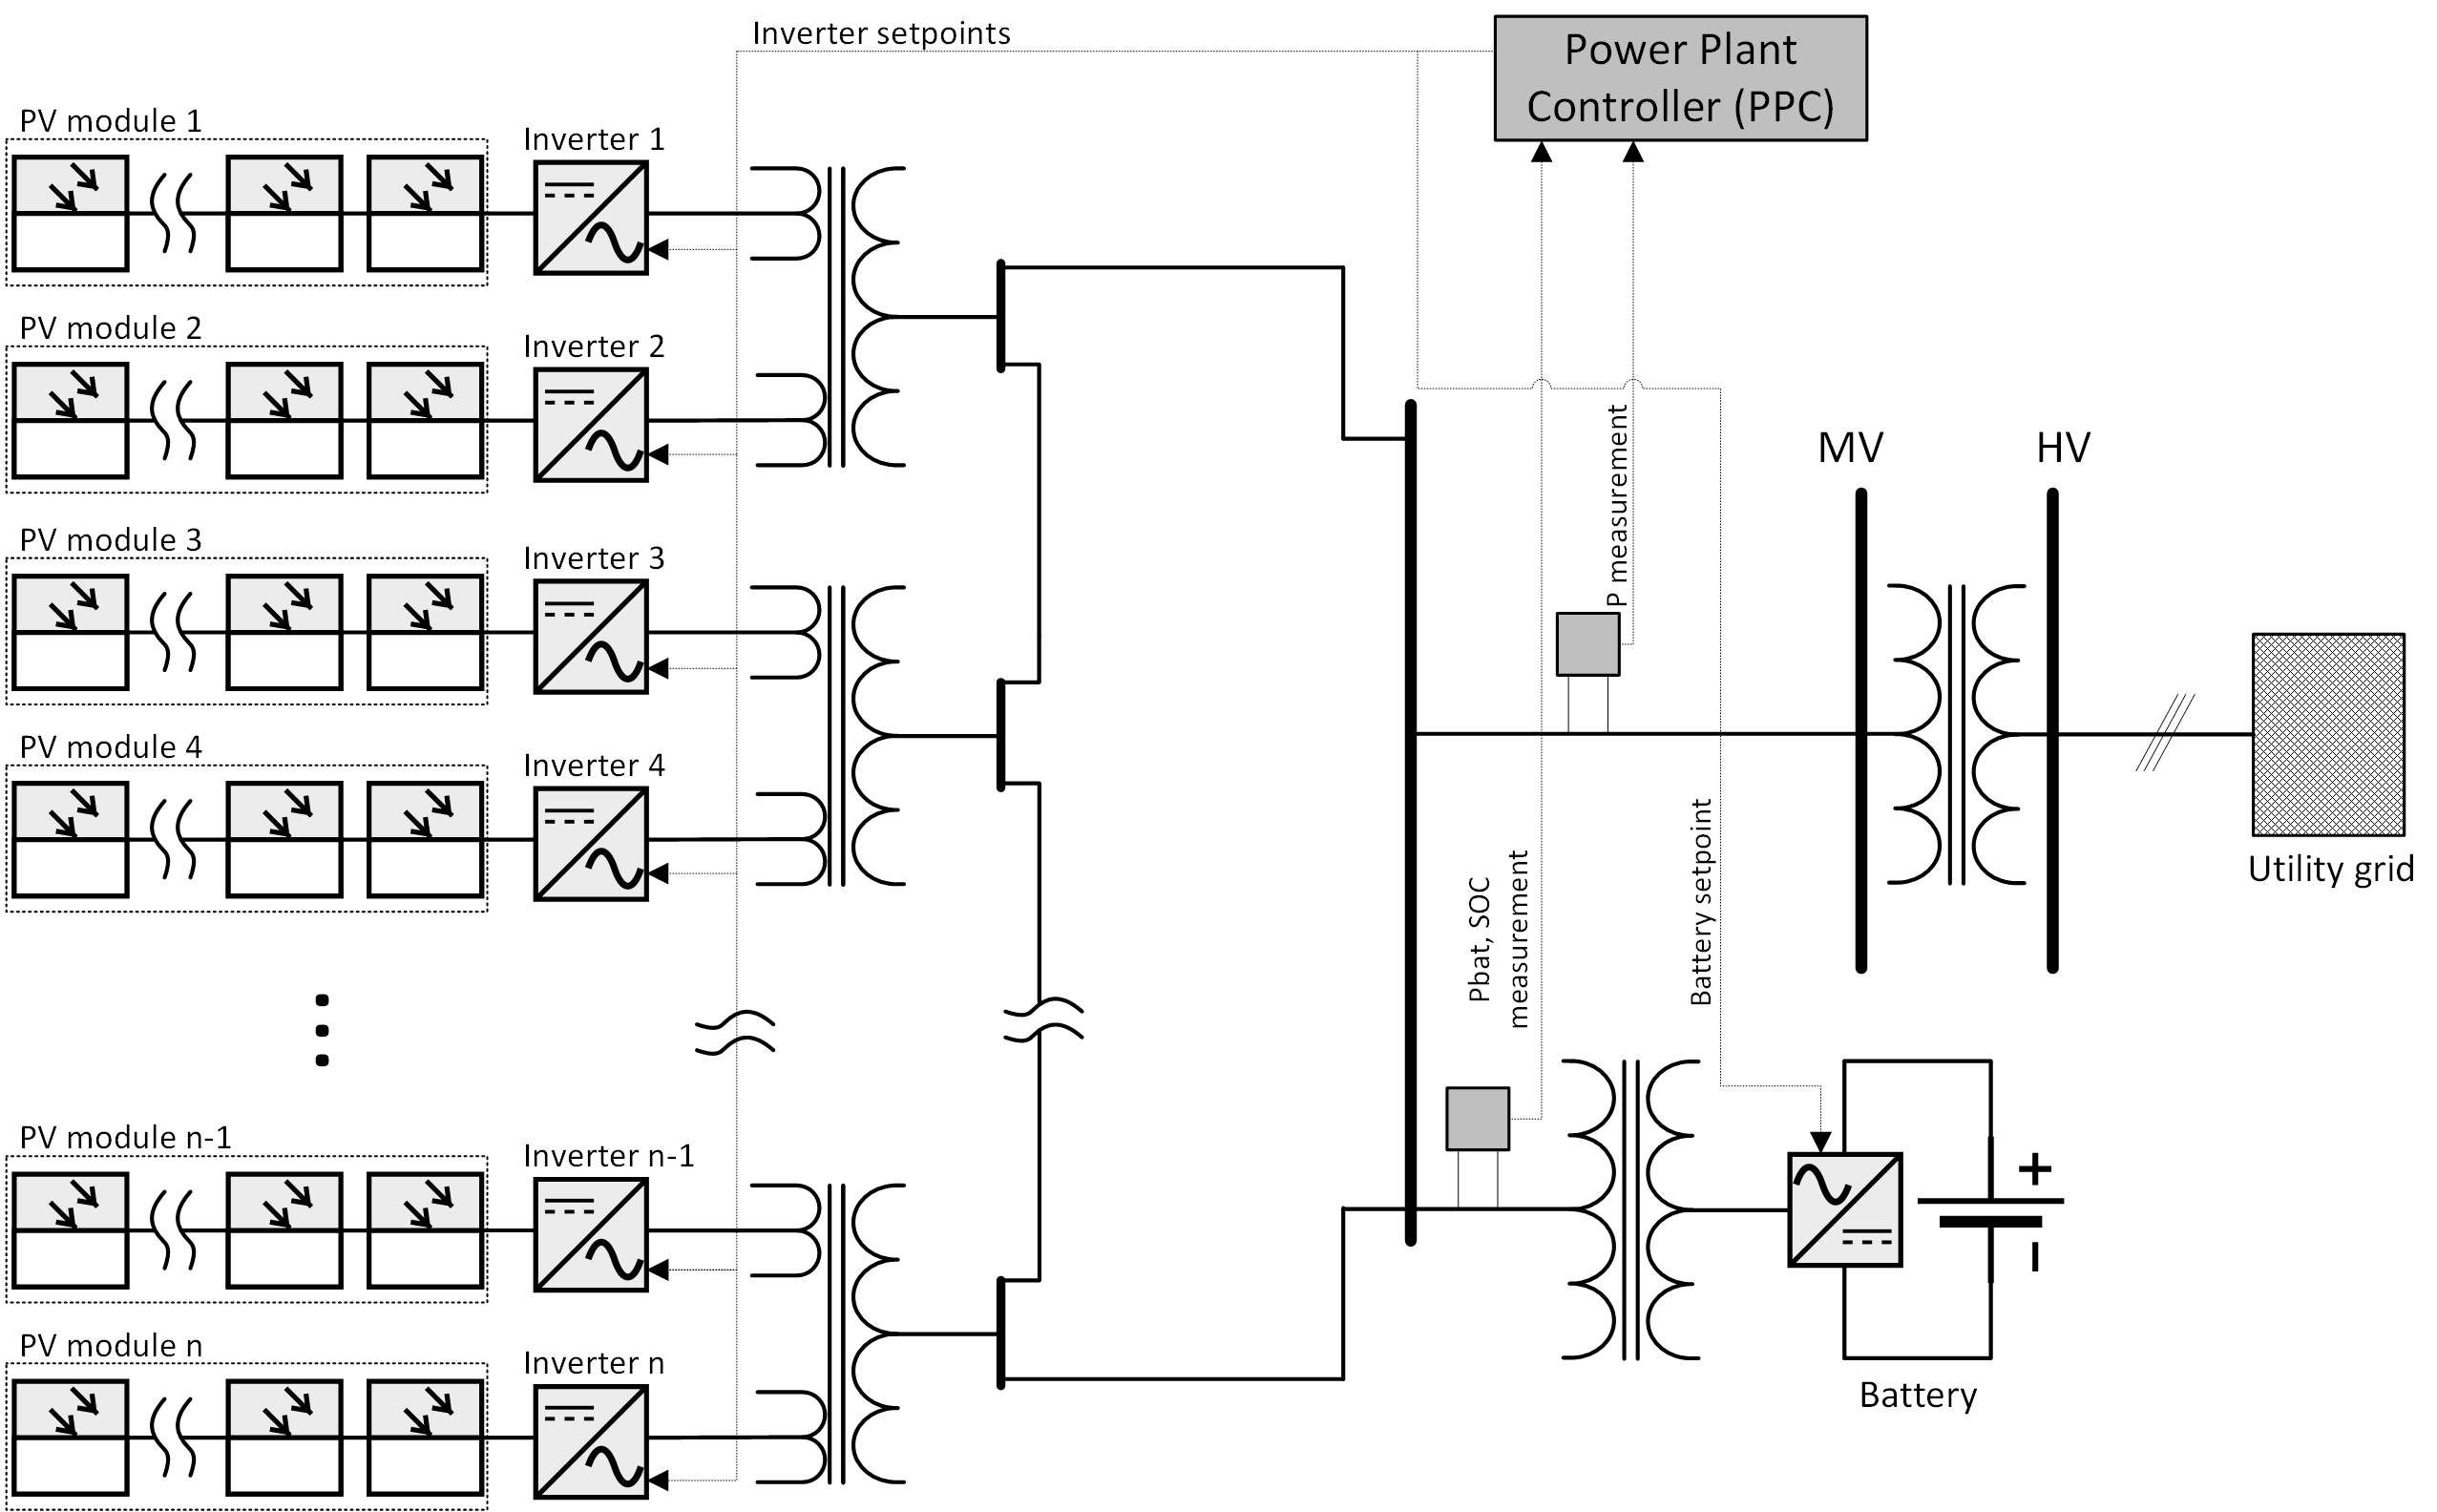 visio electrical engineering shapes download